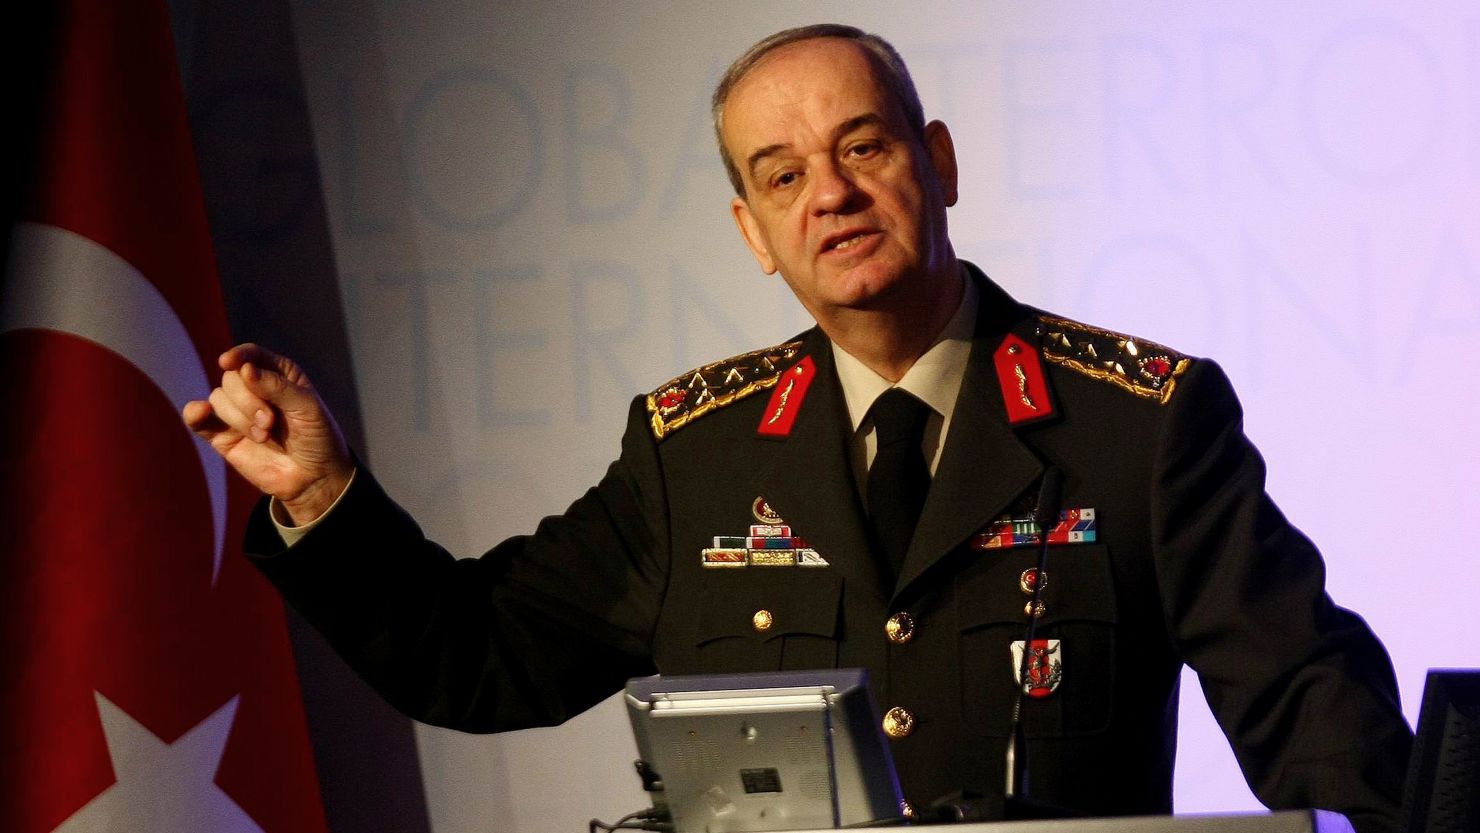 Gen. Ilker Basbug has been charged in a plot to overthrow Turkey's government (file photo).